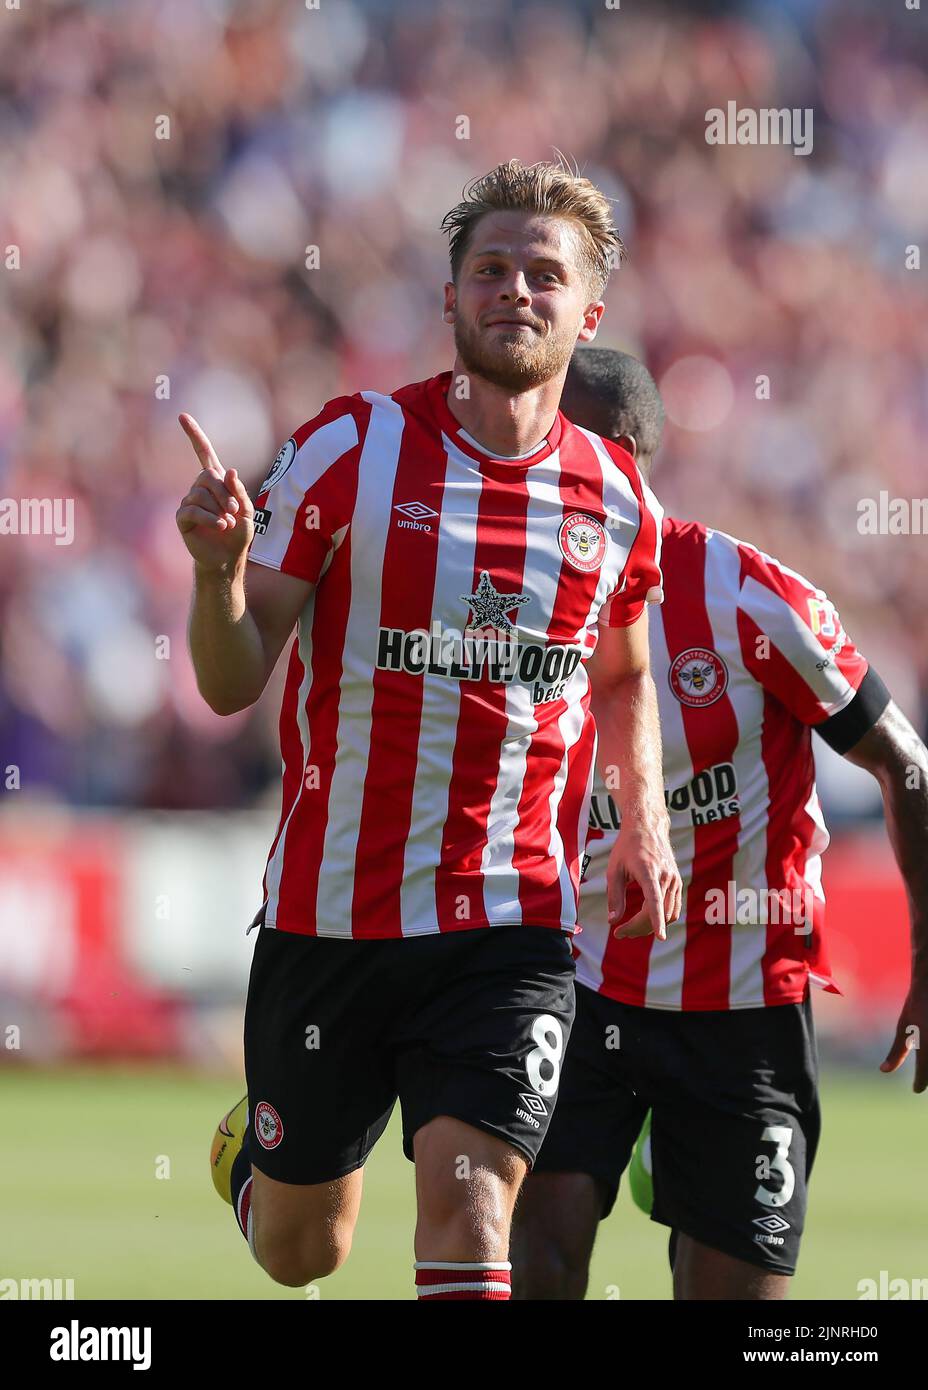 13th August 2022; Gtech Community Stadium, Brentford, London, England; Premier League football, Brentford versus Manchester United ; Mathias Jensen of Brentford celebrates towards the Man United fans after scoring his sides 2nd goal in the 18th minute to make it 2-0 Stock Photo